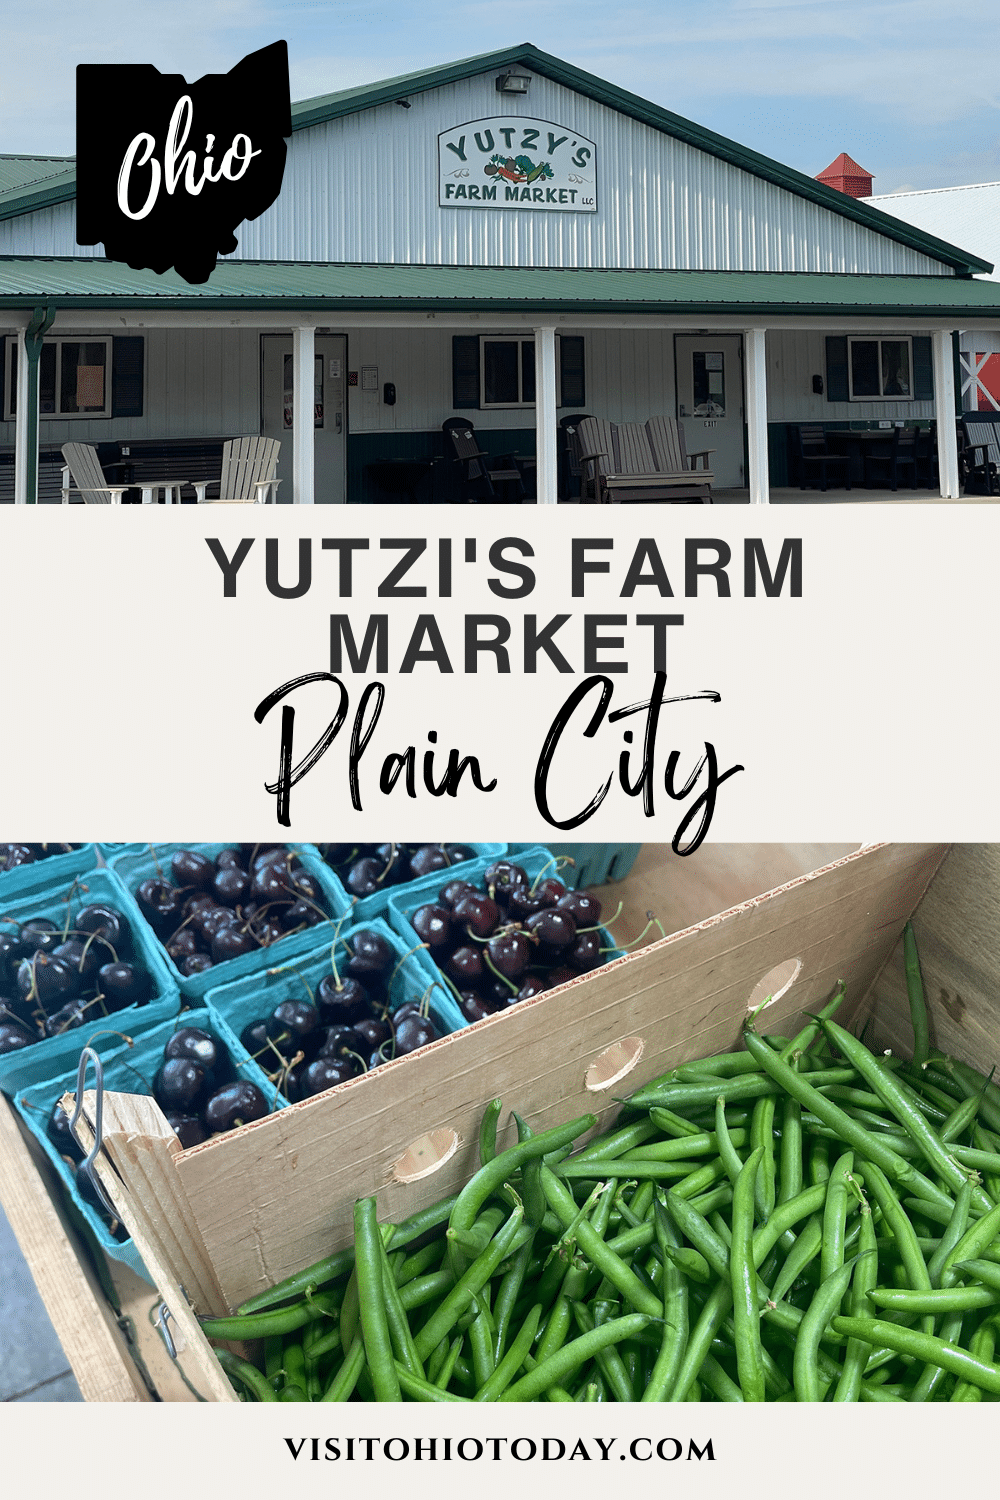 Yutzy’s Farm Market in Plain City Ohio is one of the only local places you can go for all your bulk and fresh produce needs.